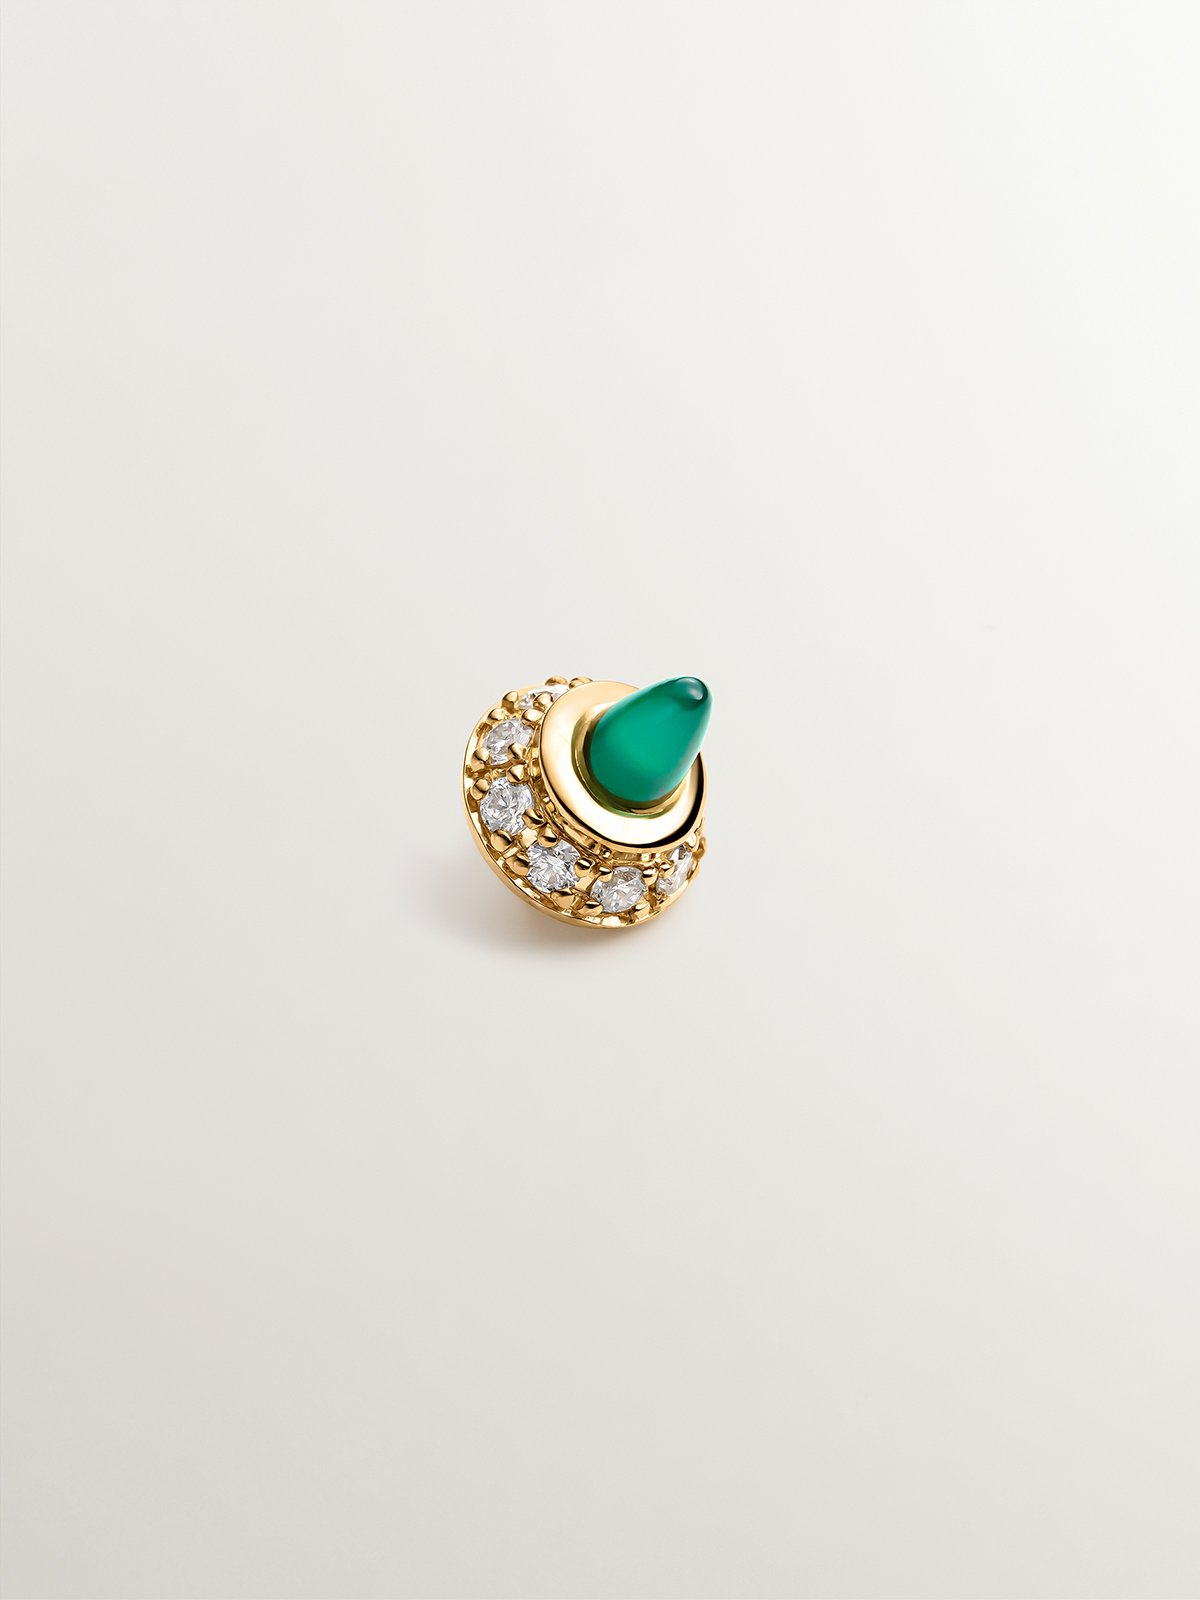 Individual 18k yellow gold pending with green ónix and white diamonds